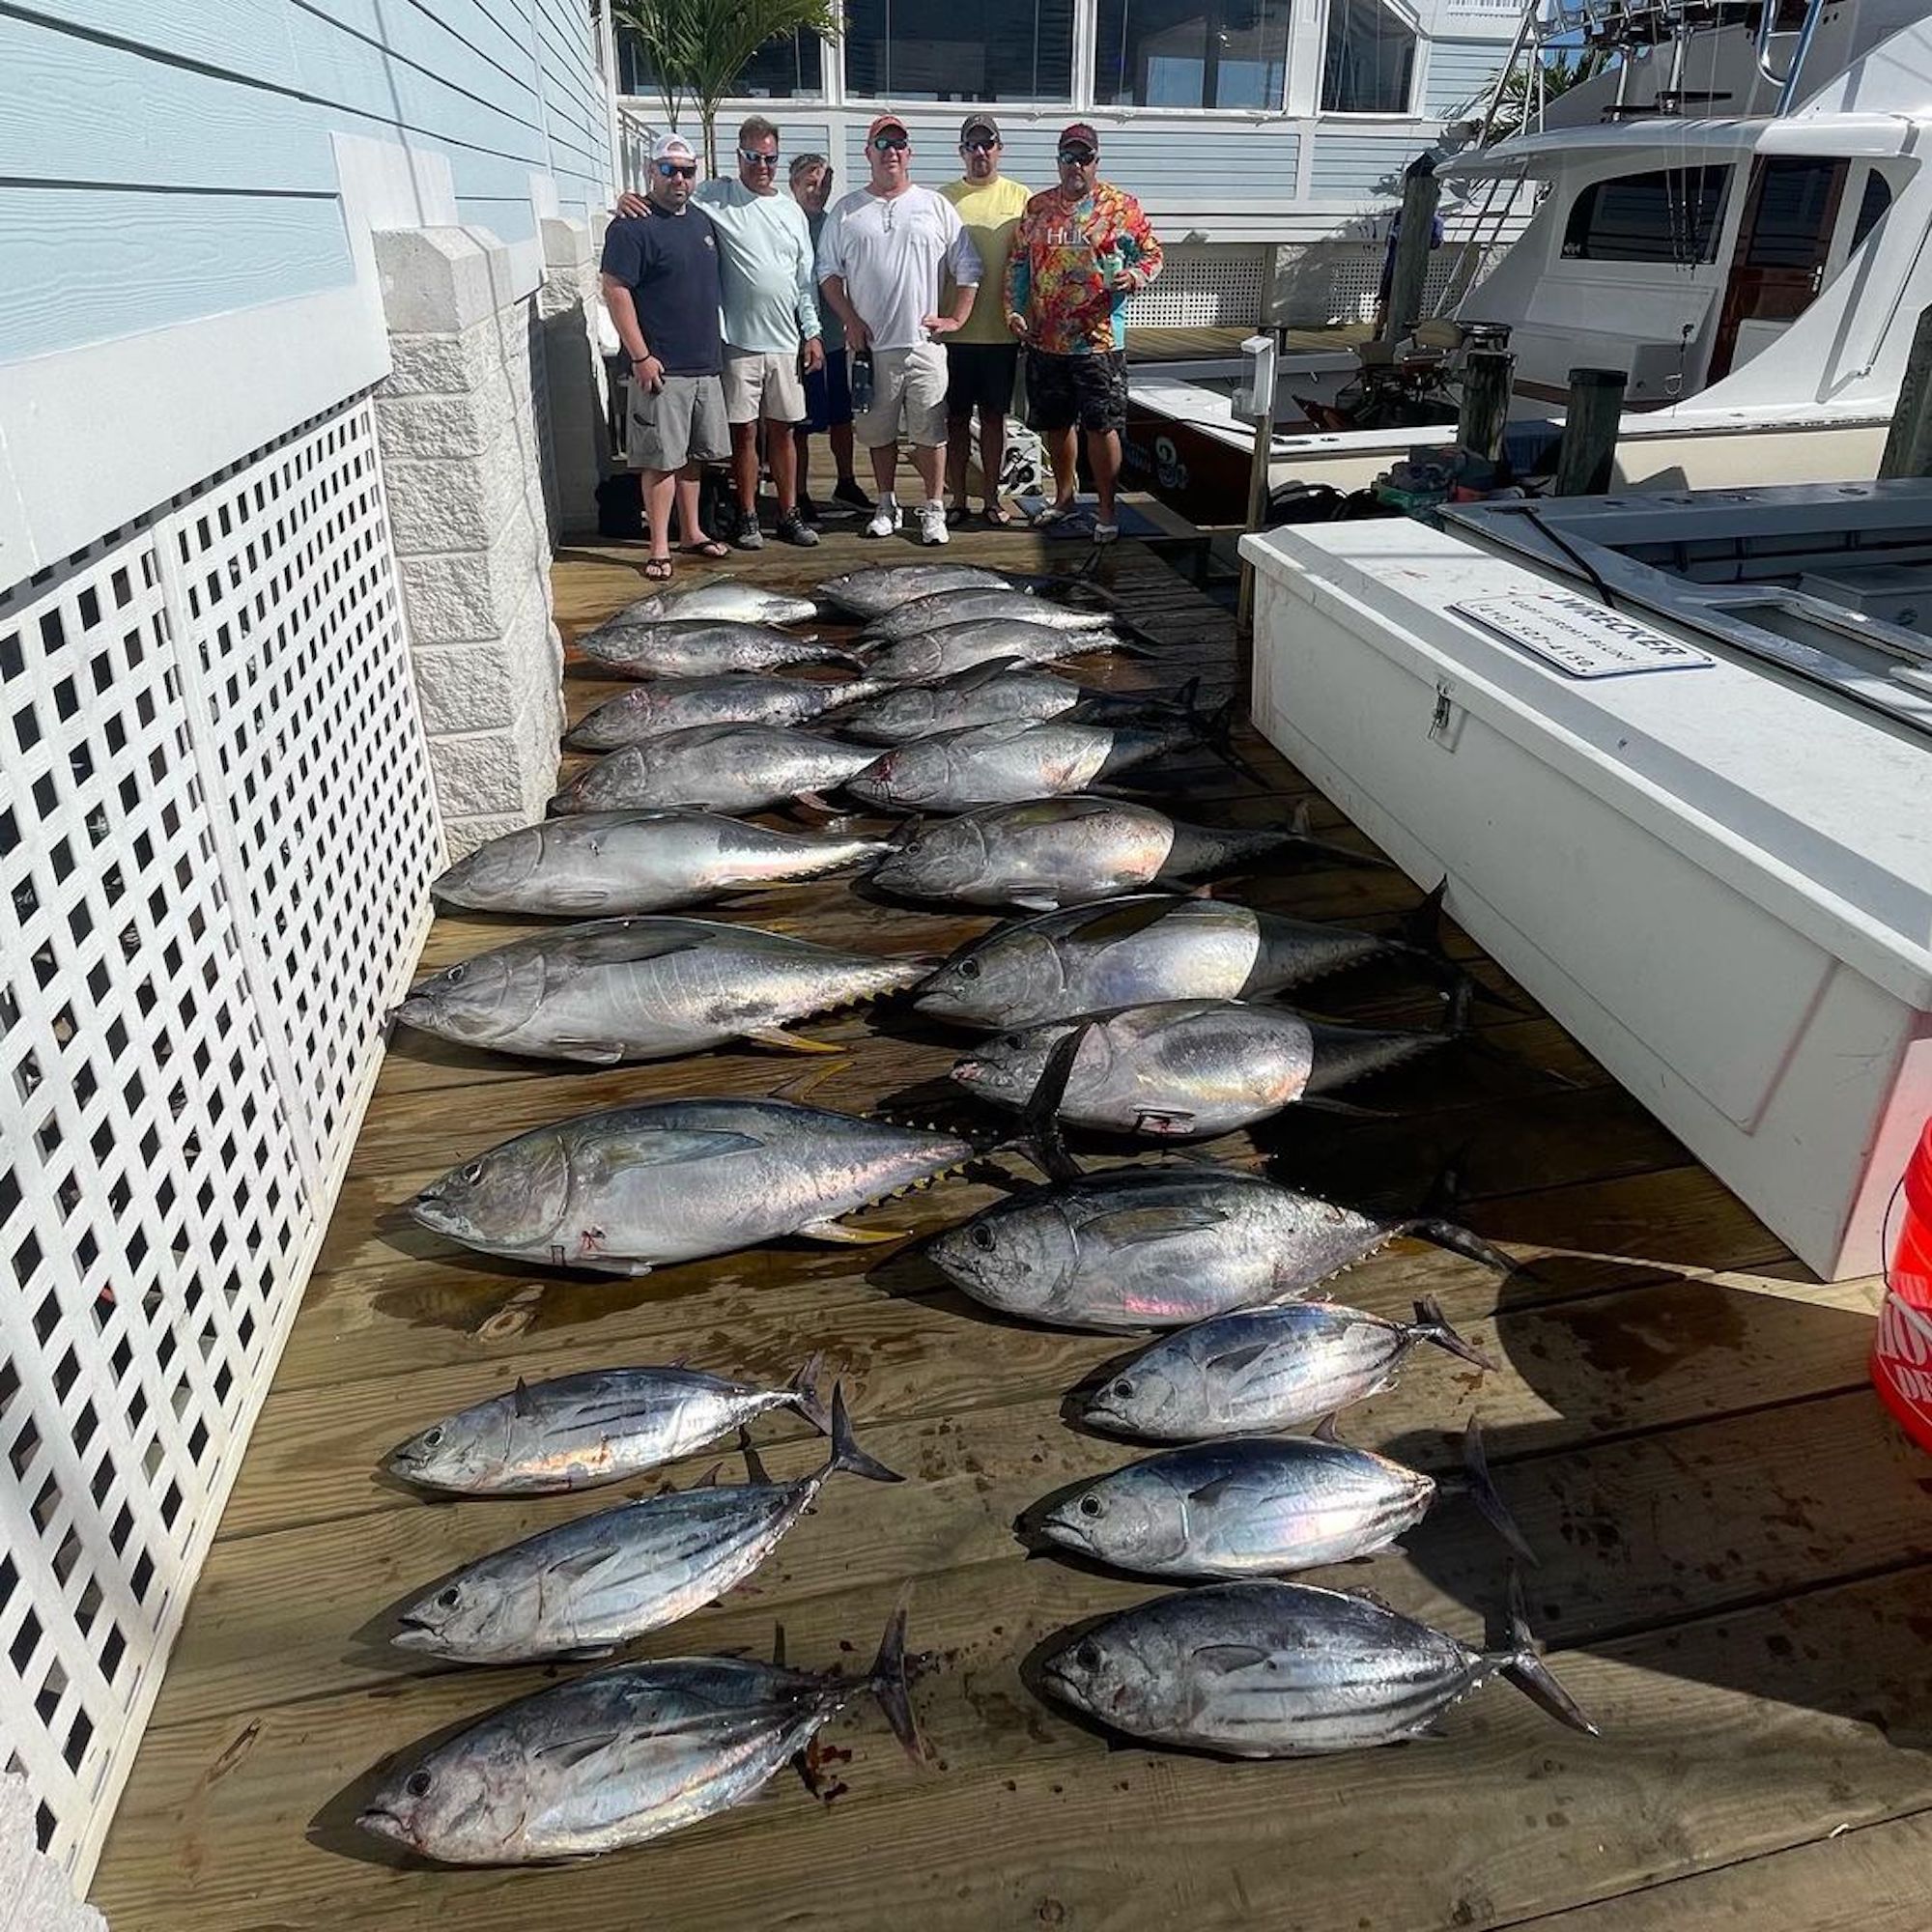 And The Tunas Were Snappin’